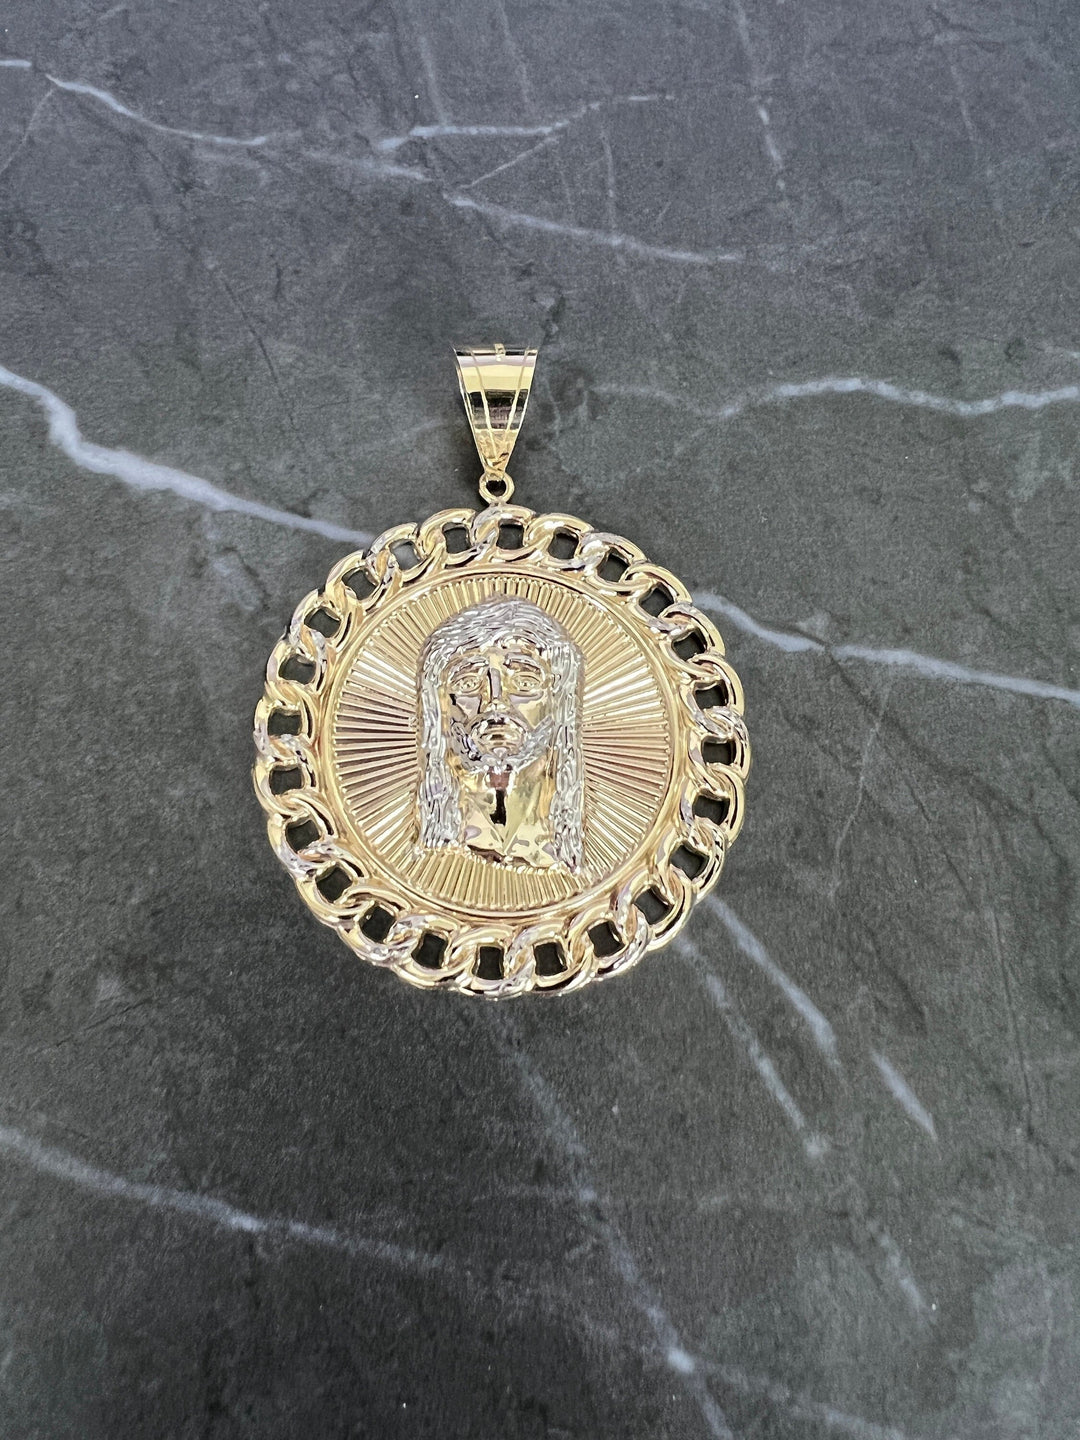 10K Yellow and White Gold .925 Sterling Silver Textured Diamond Cut Jesus Face Medallion Charm/Pendant, Gold Face of Jesus Religious Charm